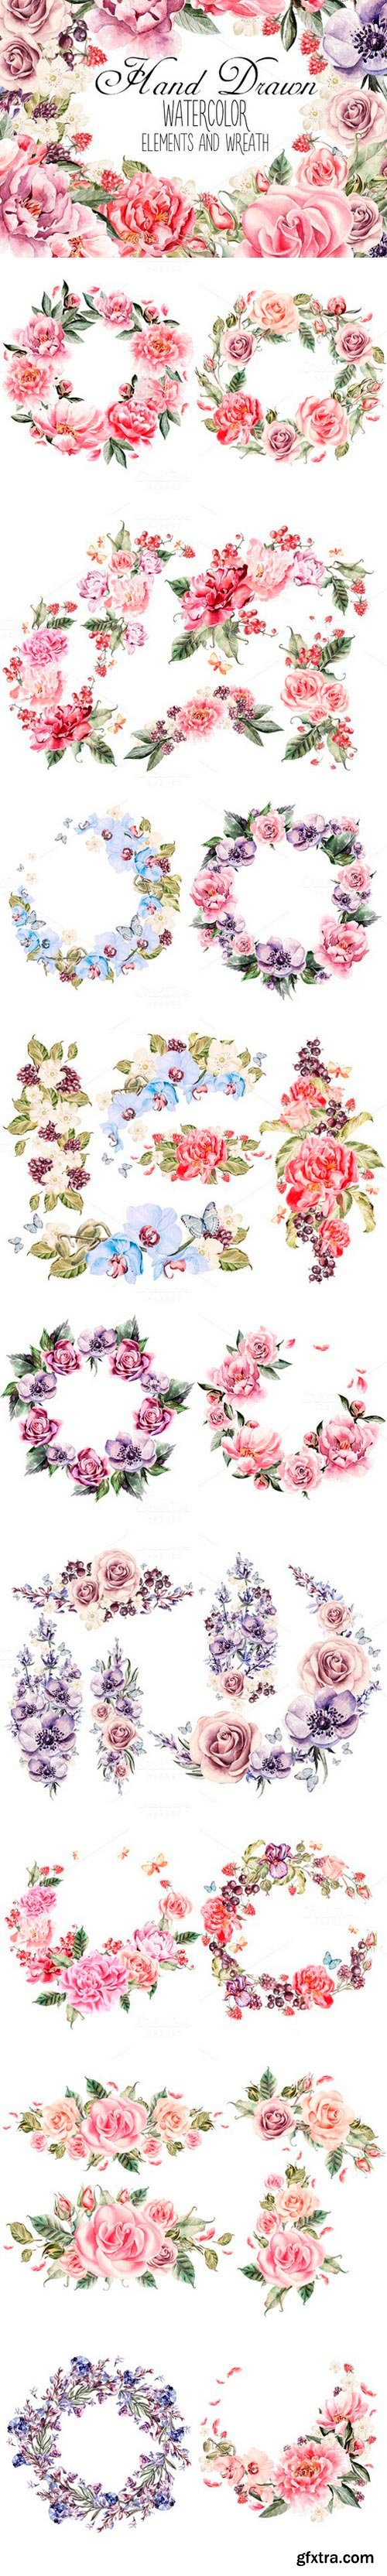 CM - watercolor ELEMENTS and WREATH 691137